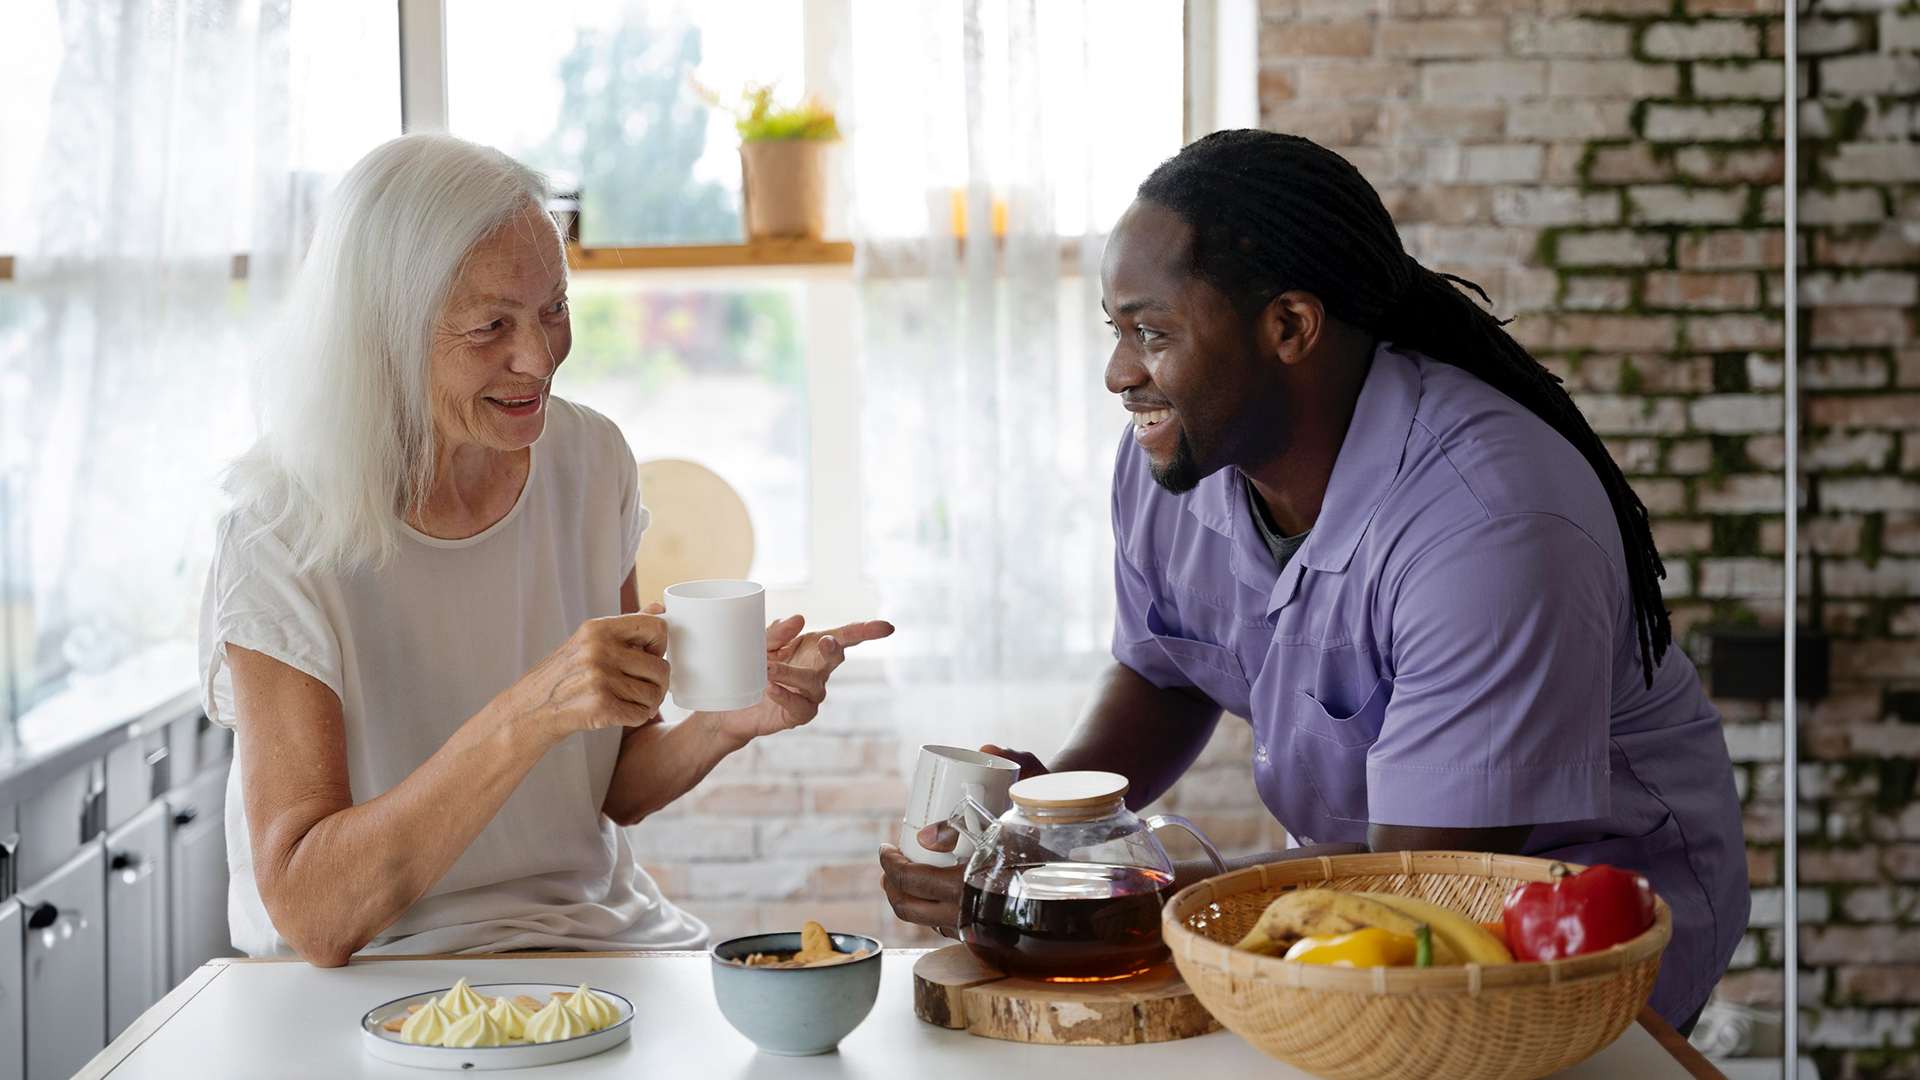 A caregiver from Legacy Homecare LA is assisting a person with Parkinson's disease during mealtime, focusing on managing dysphagia. The image highlights the importance of specialized caregiving for individuals with Parkinson's, particularly in dealing with swallowing difficulties and promoting proper nutrition.